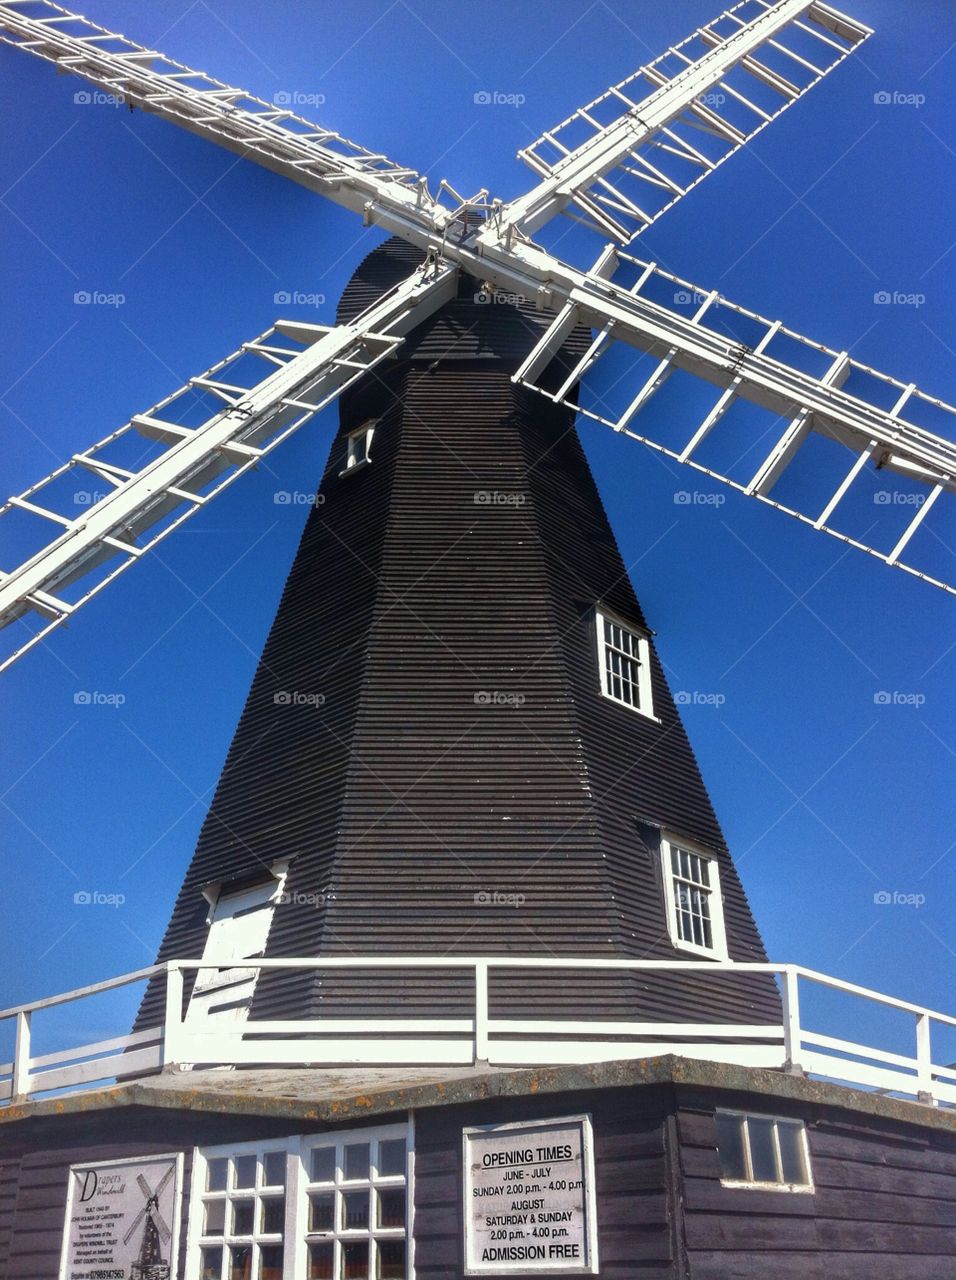 Drapers Mill in Margate, Kent. England.